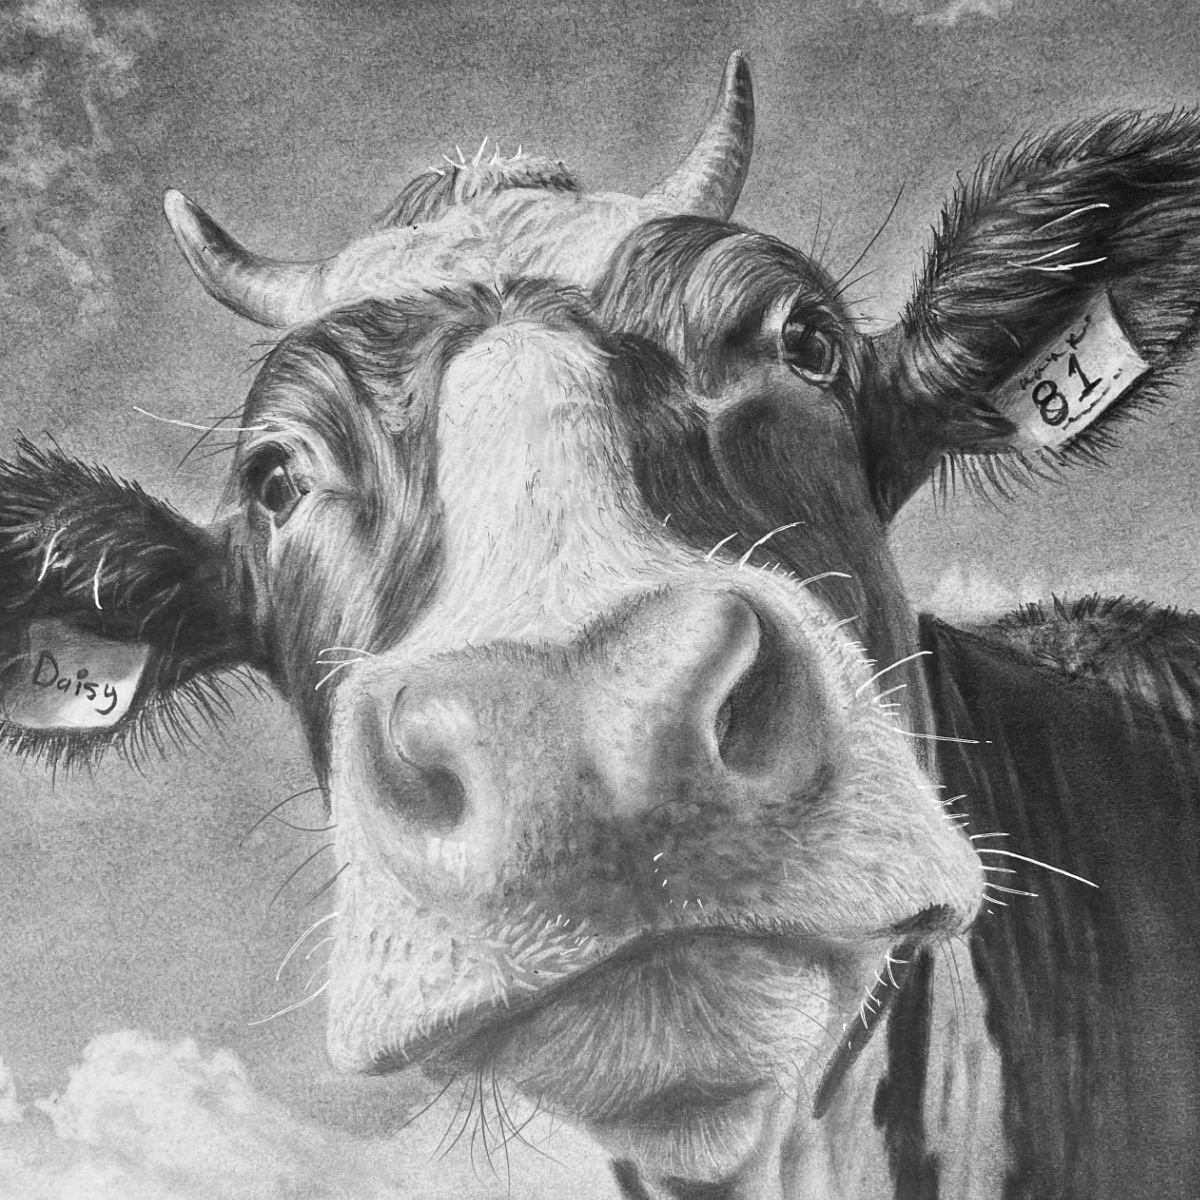 How to Draw a Cow Portrait
onlineartlessons.com/class/how-to-d…
#CowPortrait #PencilDrawing #RealisticSketching #ArtClassOnline #DrawingTutorial #AnimalArt #SketchingTechniques #TextureDrawing #LearnToDraw #ArtistsOfInstagram